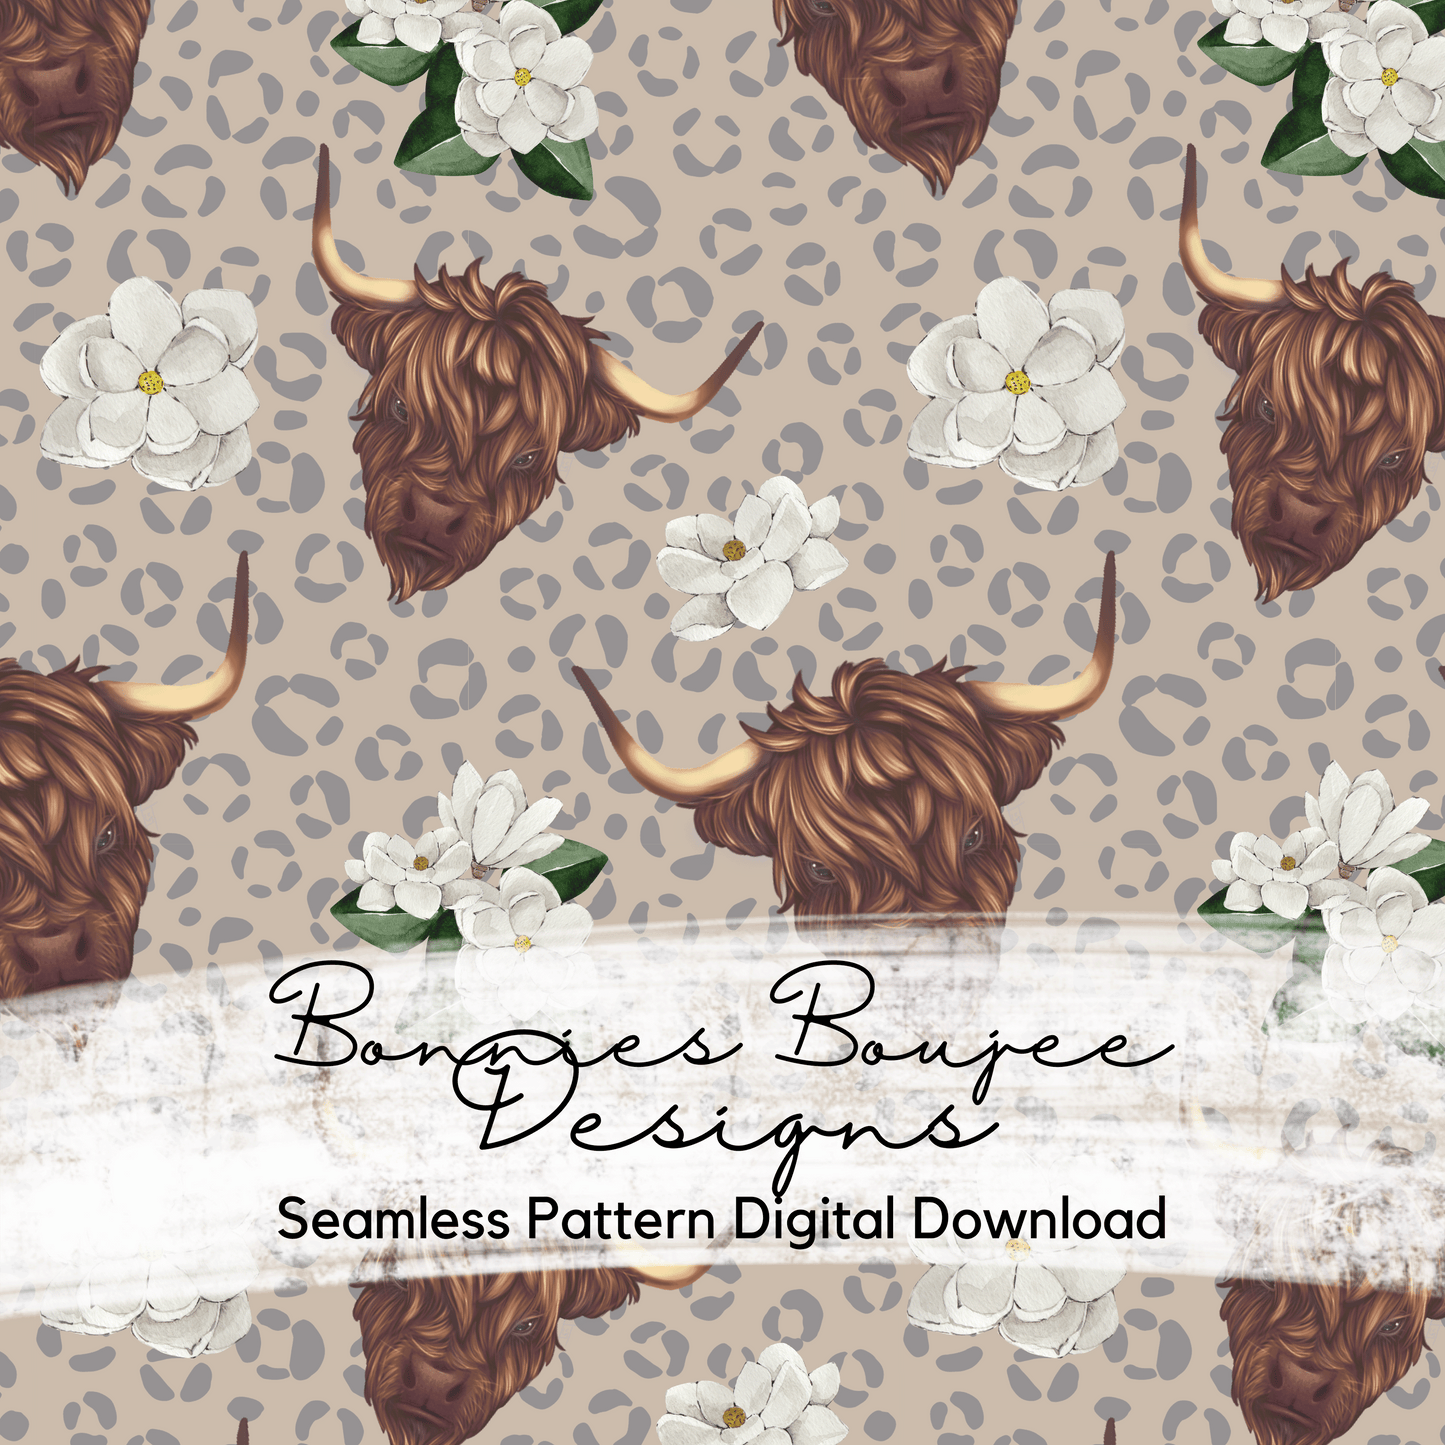 Highland Cow and Magnolia Flowers Seamless File